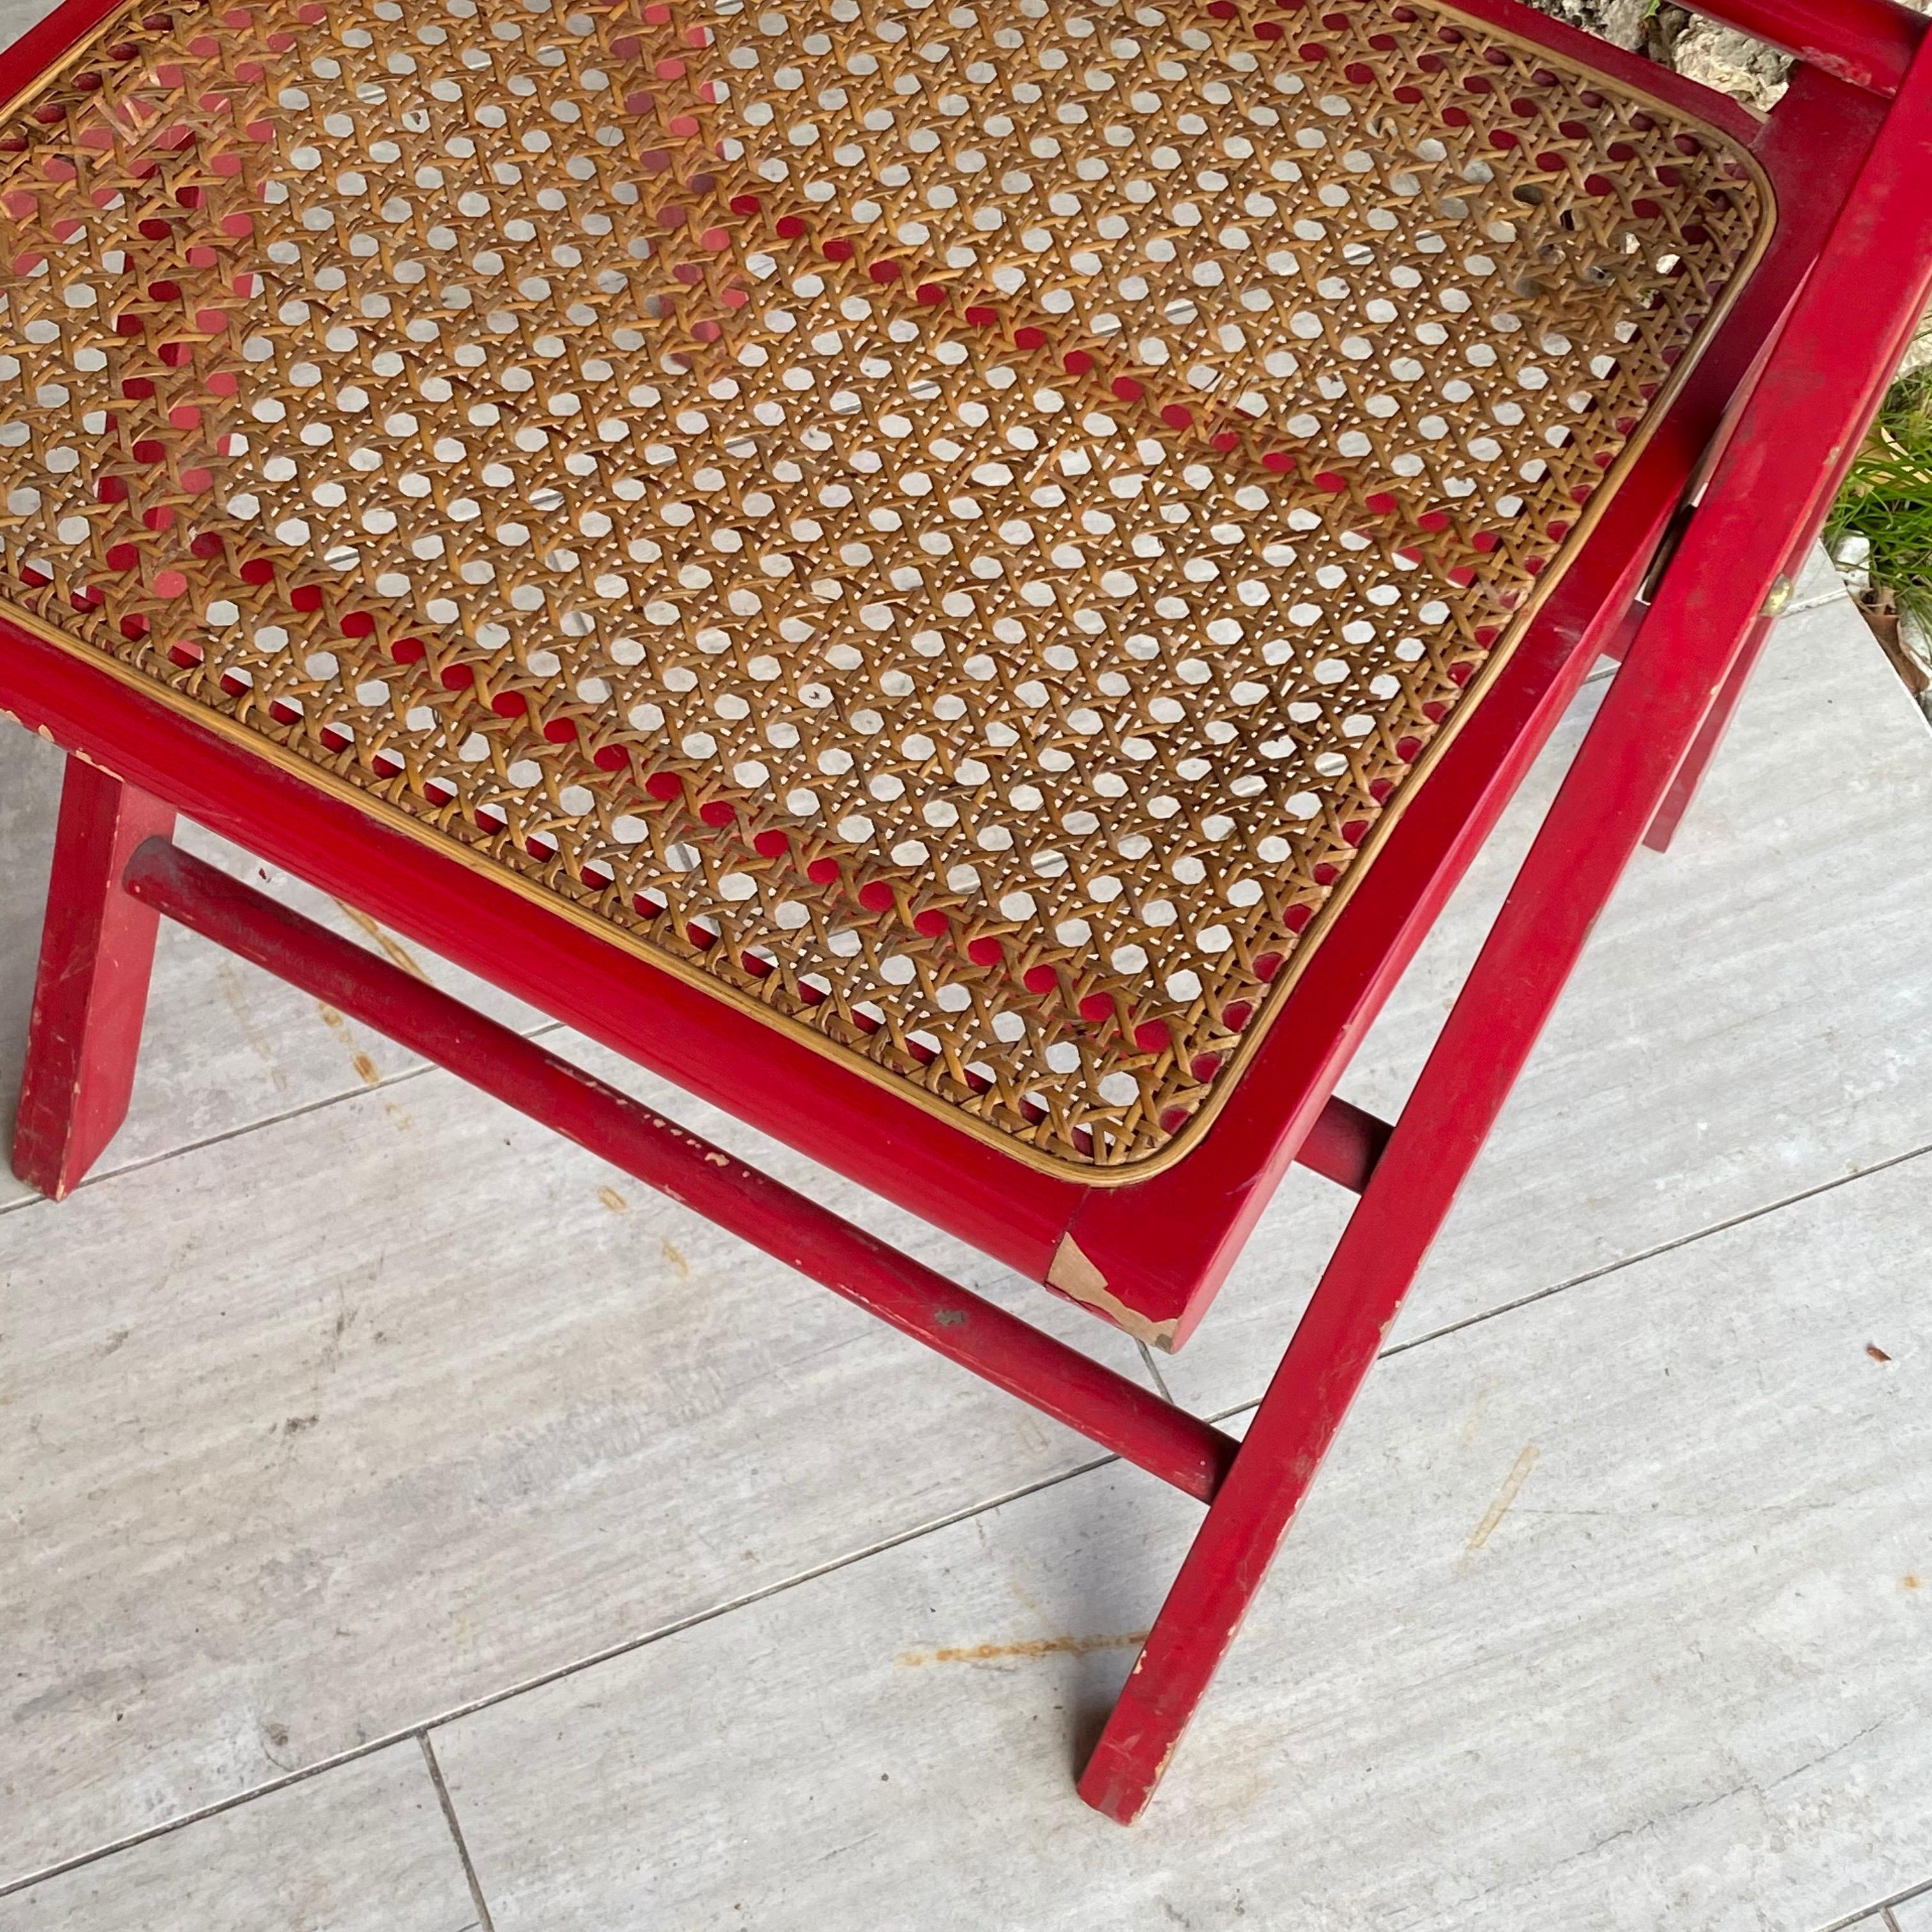 Lacquered Cane Folding Chairs Set of 2, France 1970, Red Color